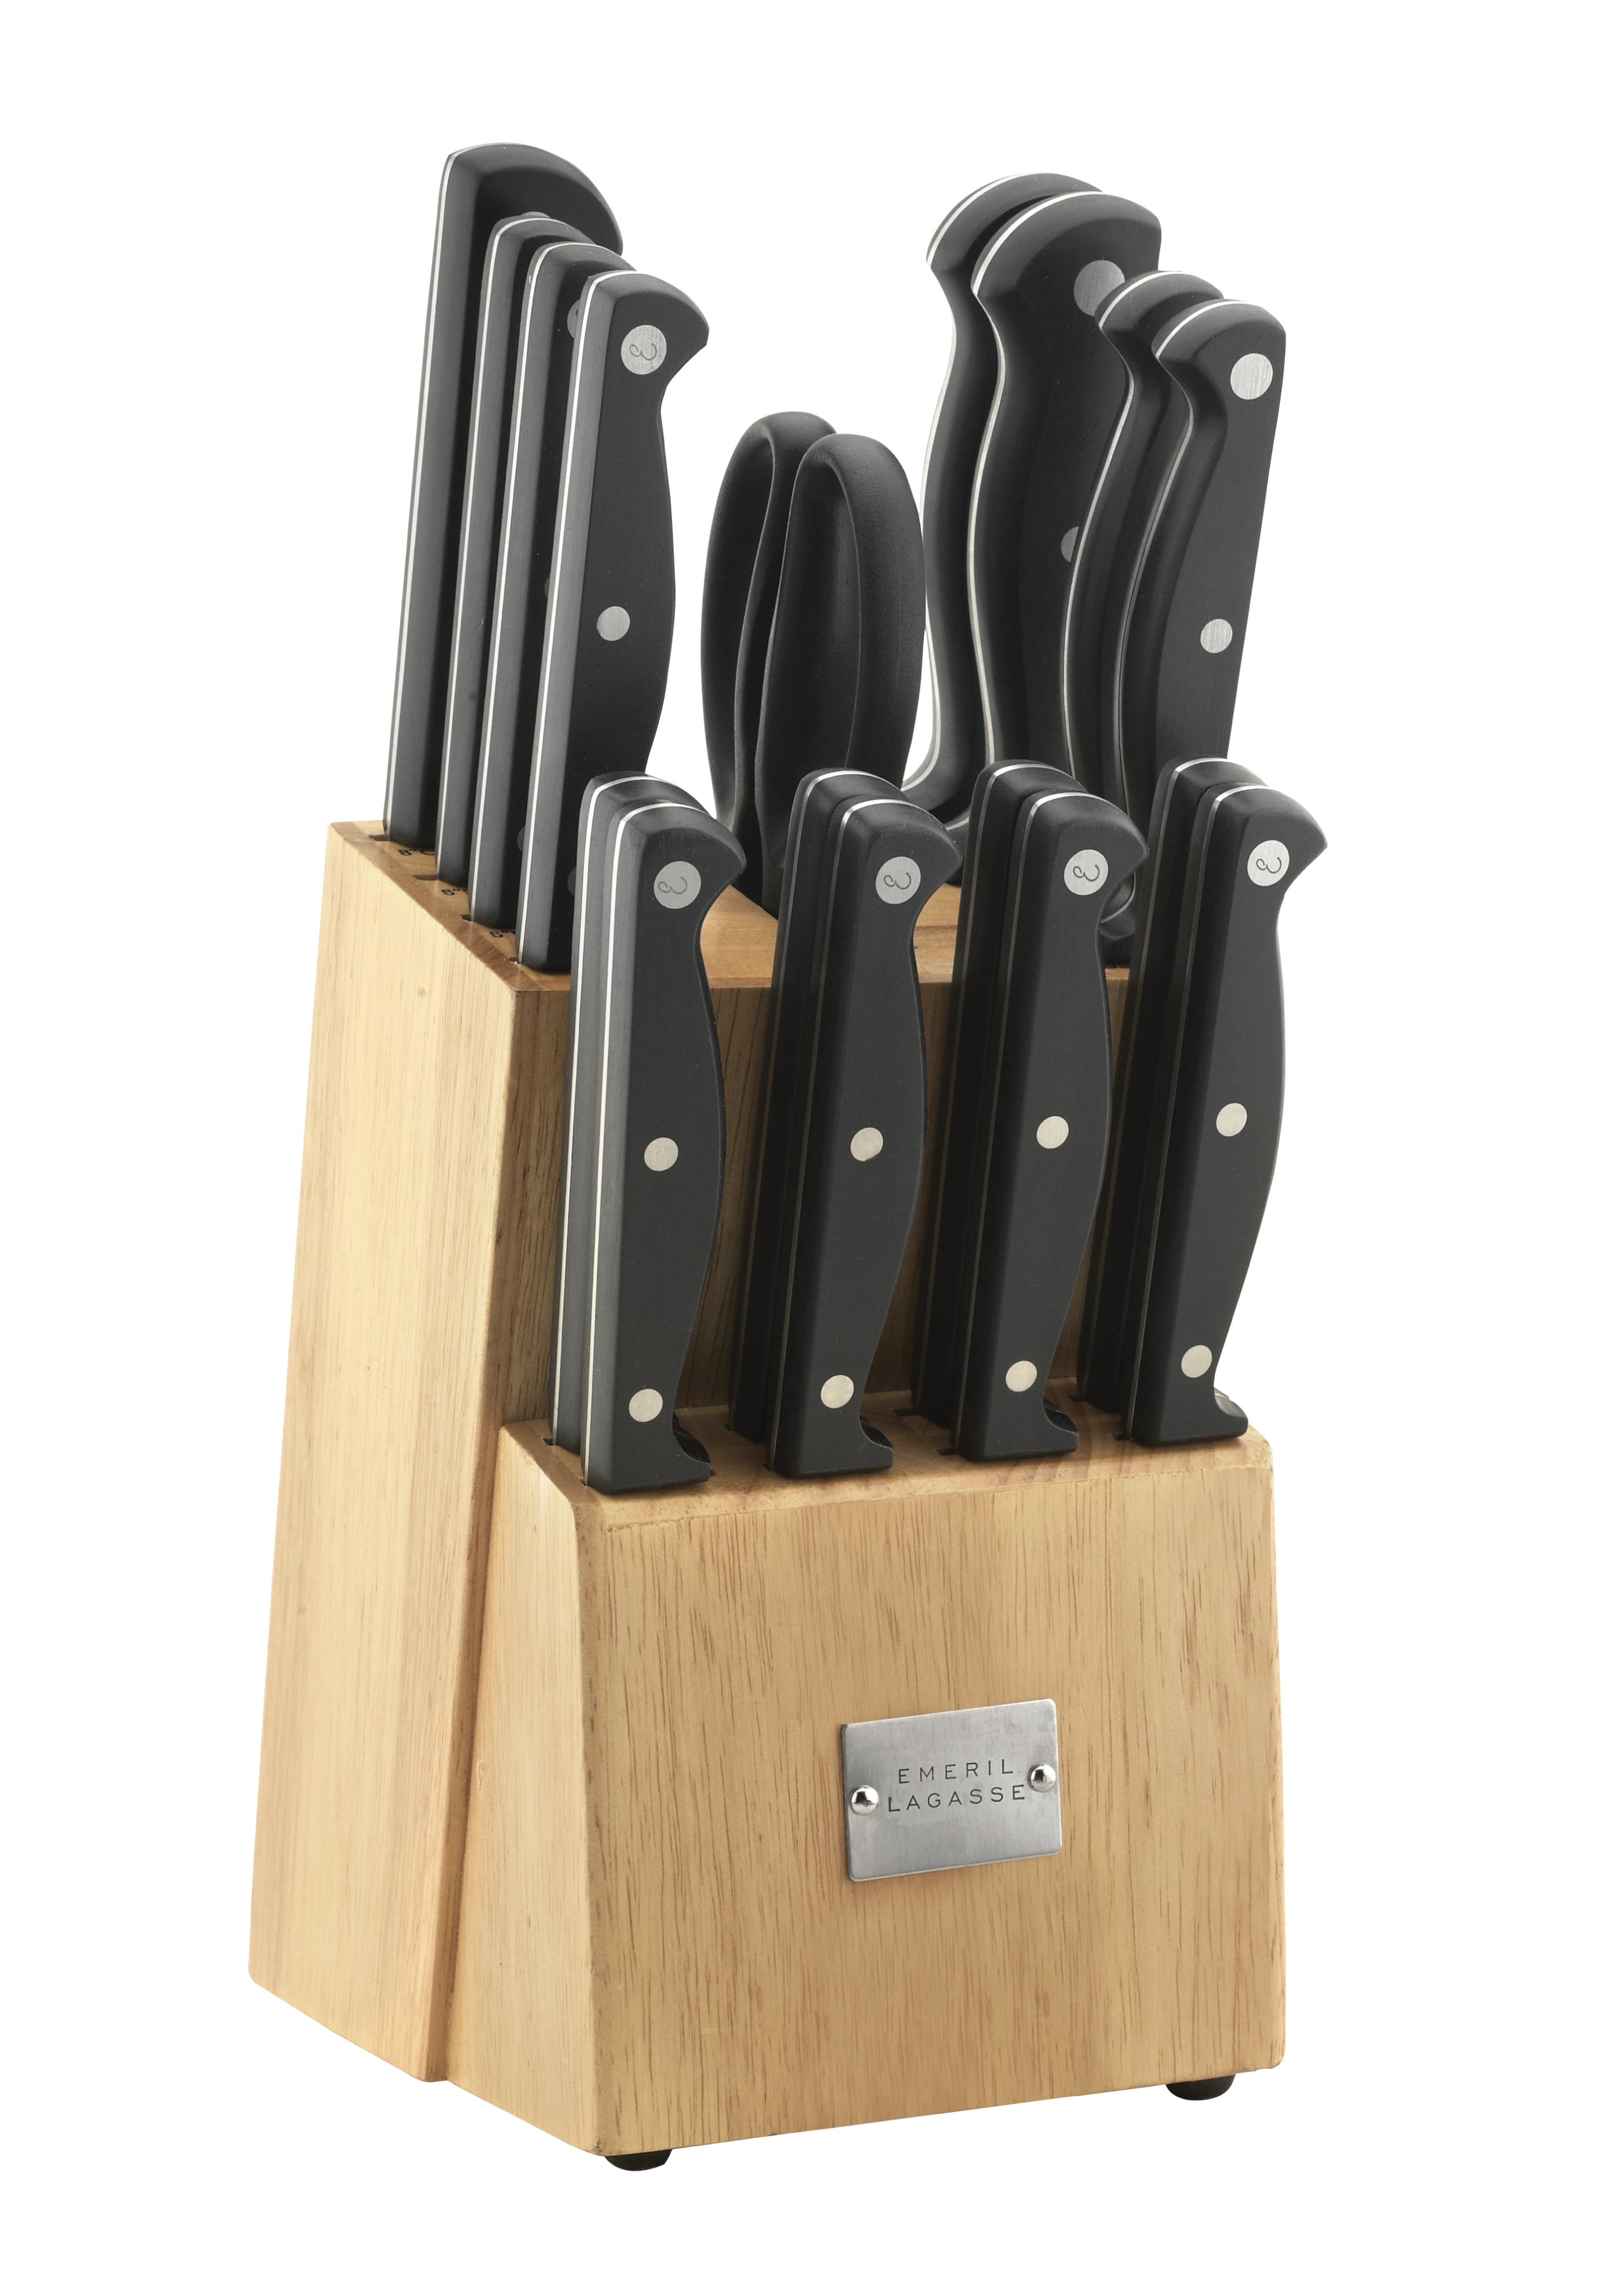 Emeril Lagrasse Cutlery 3 Piece Knife Set Bamboo Cutting Board with Drawer